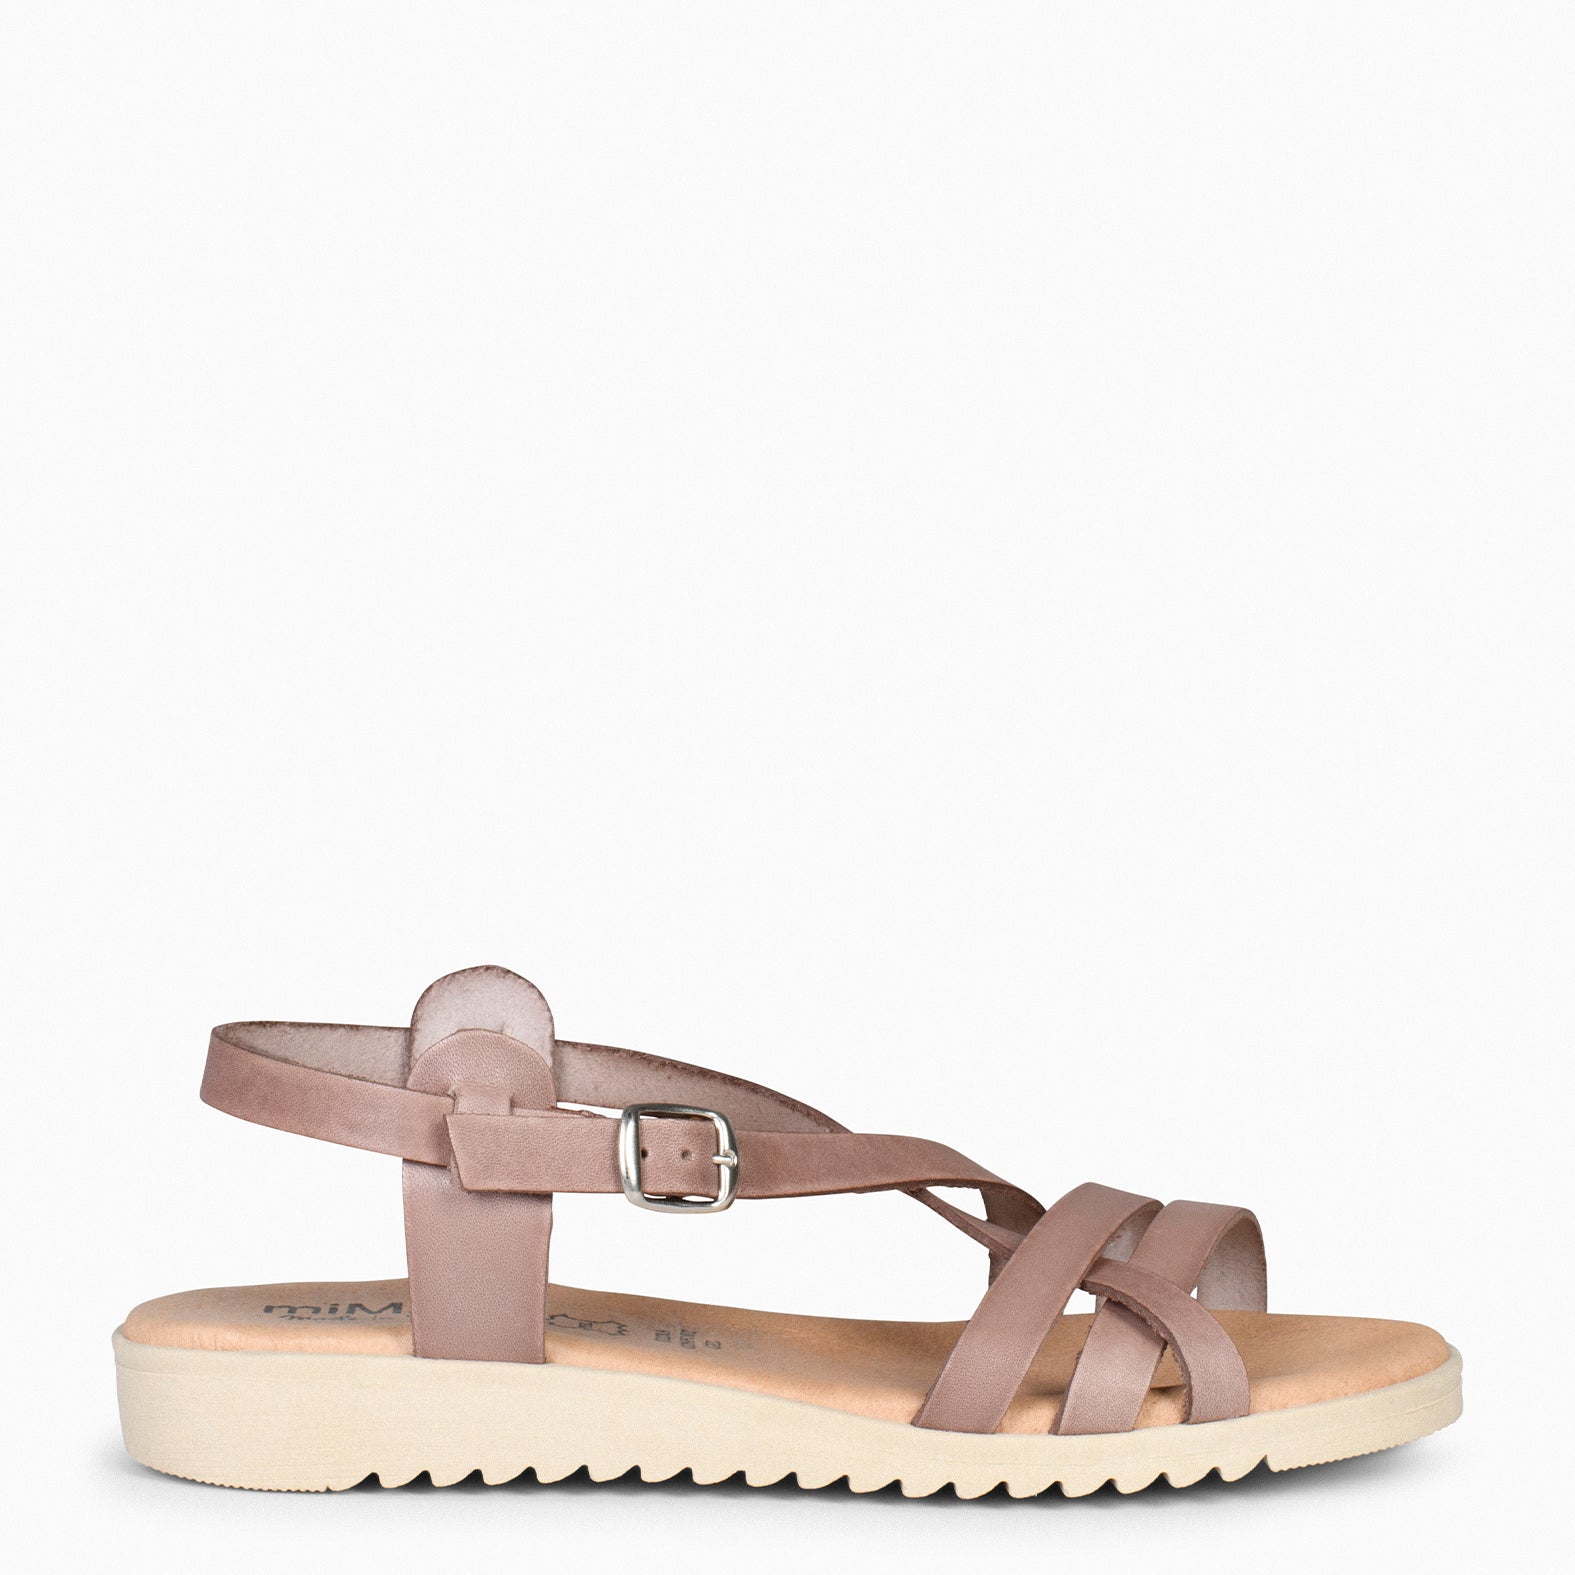 SPIRIT – TAUPE Flat sandal with crossed strap